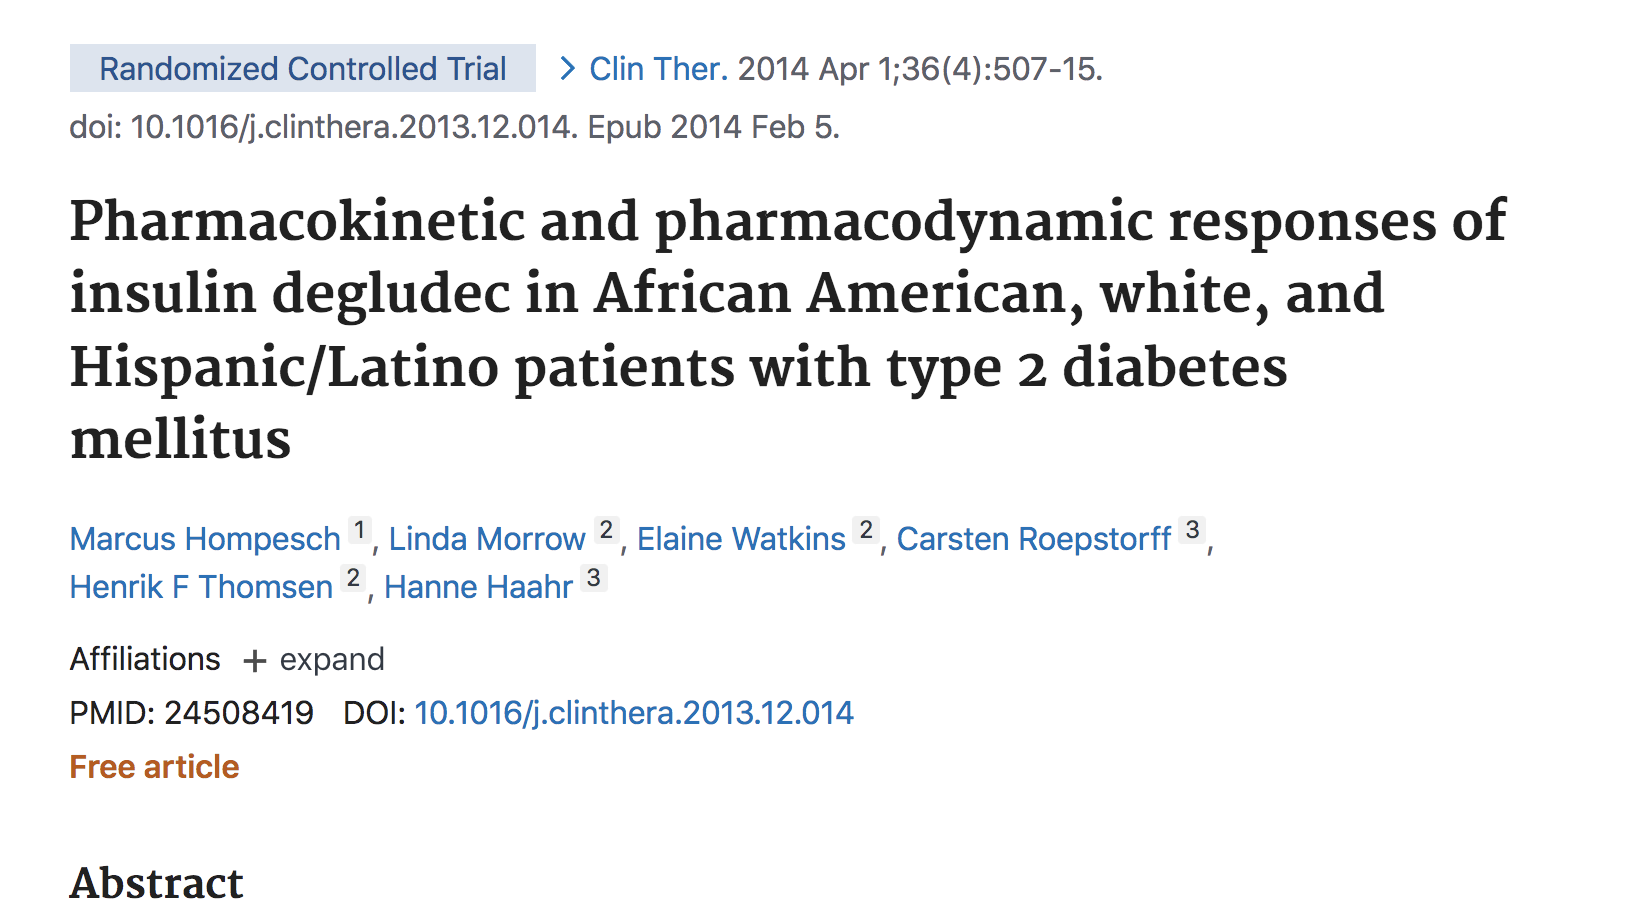 image of Pharmacokinetic and Pharmacodynamic Responses of Insulin Degludec in African American, White, and Hispanic/Latino Patients With Type 2 Diabetes Mellitus.